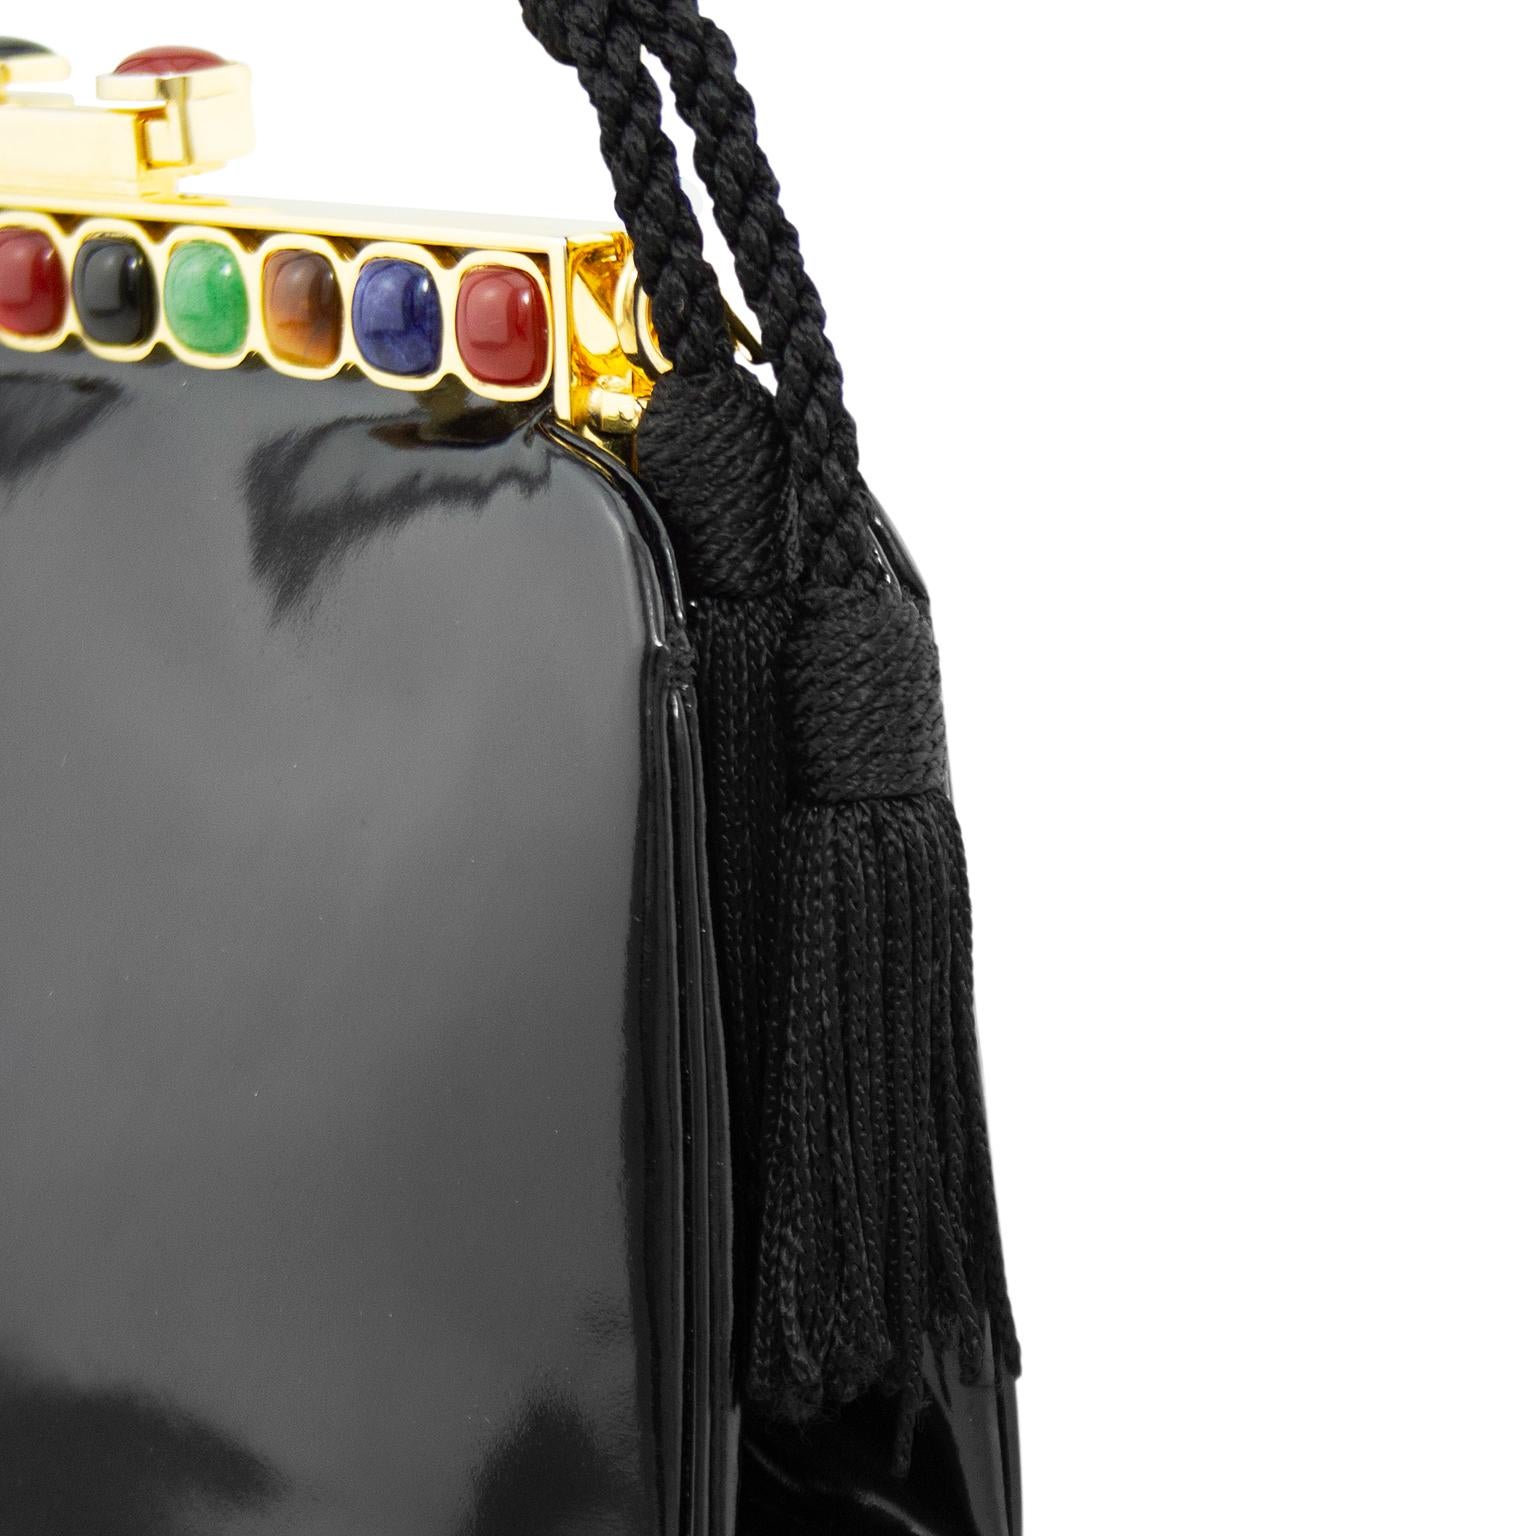 1980s Judith Leiber Black Patent Leather Bag with Colourful Cabochons 1